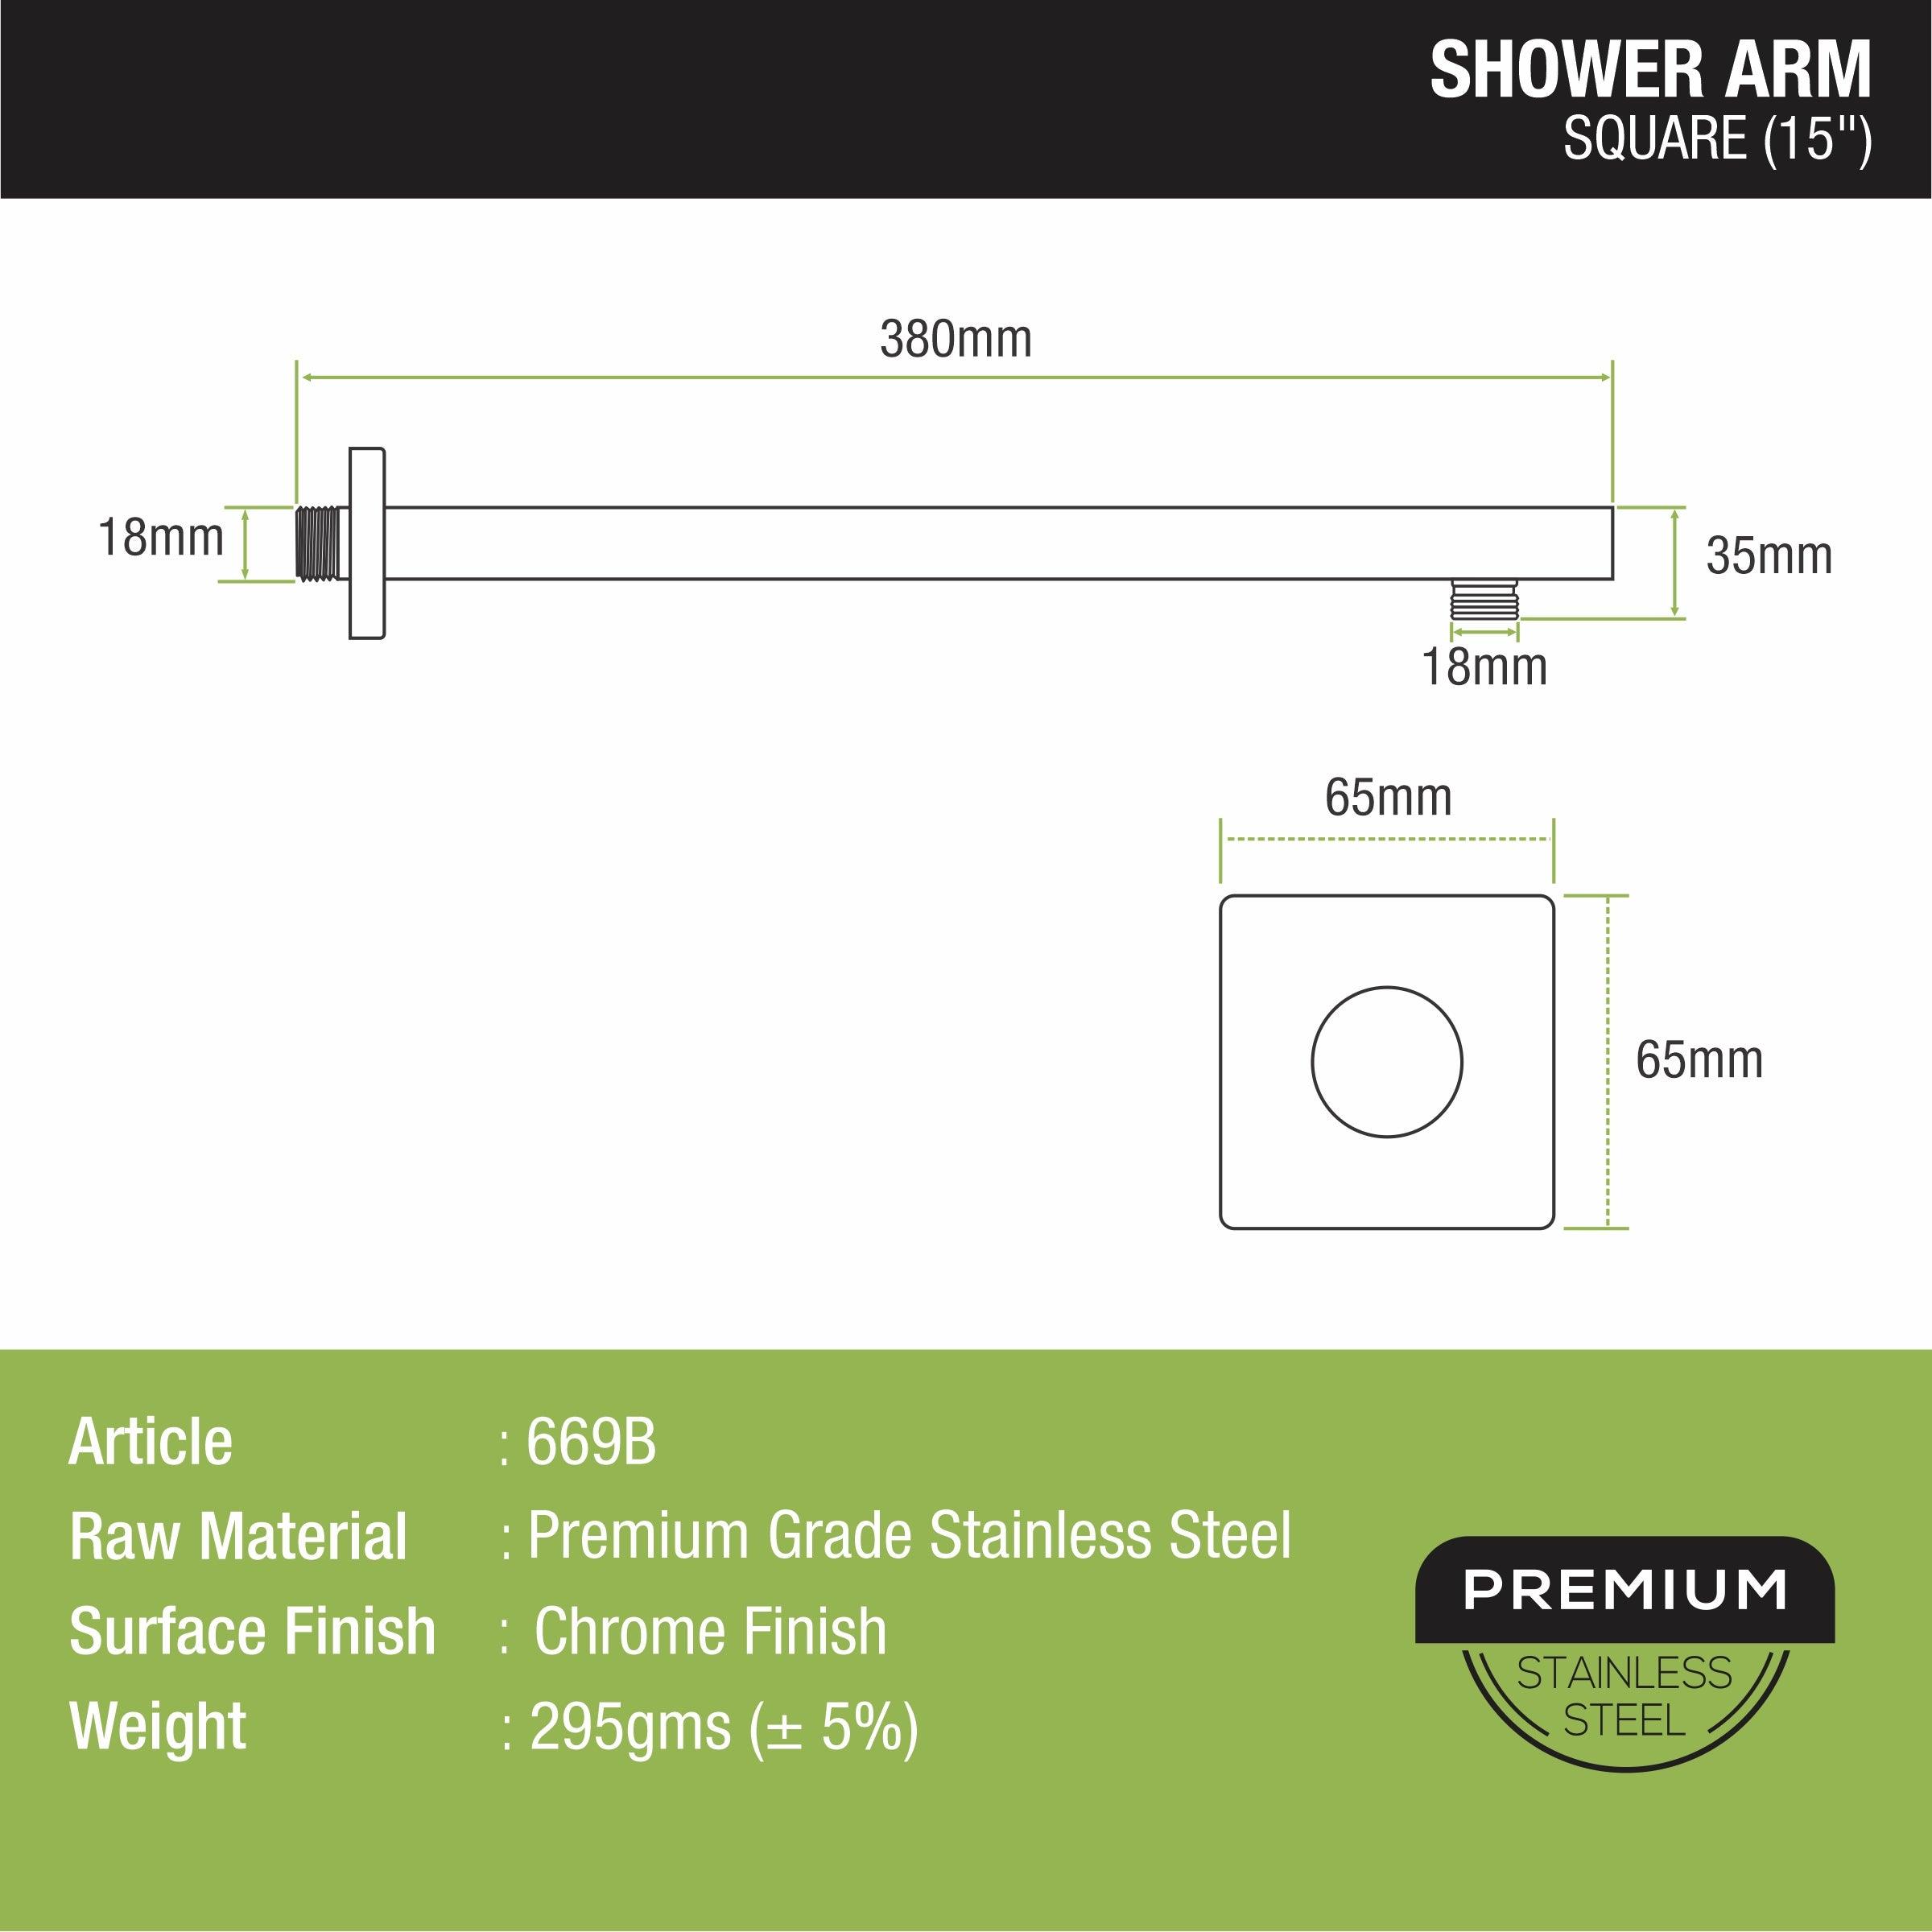 Square Shower Arm (15 Inches) sizes and dimensions